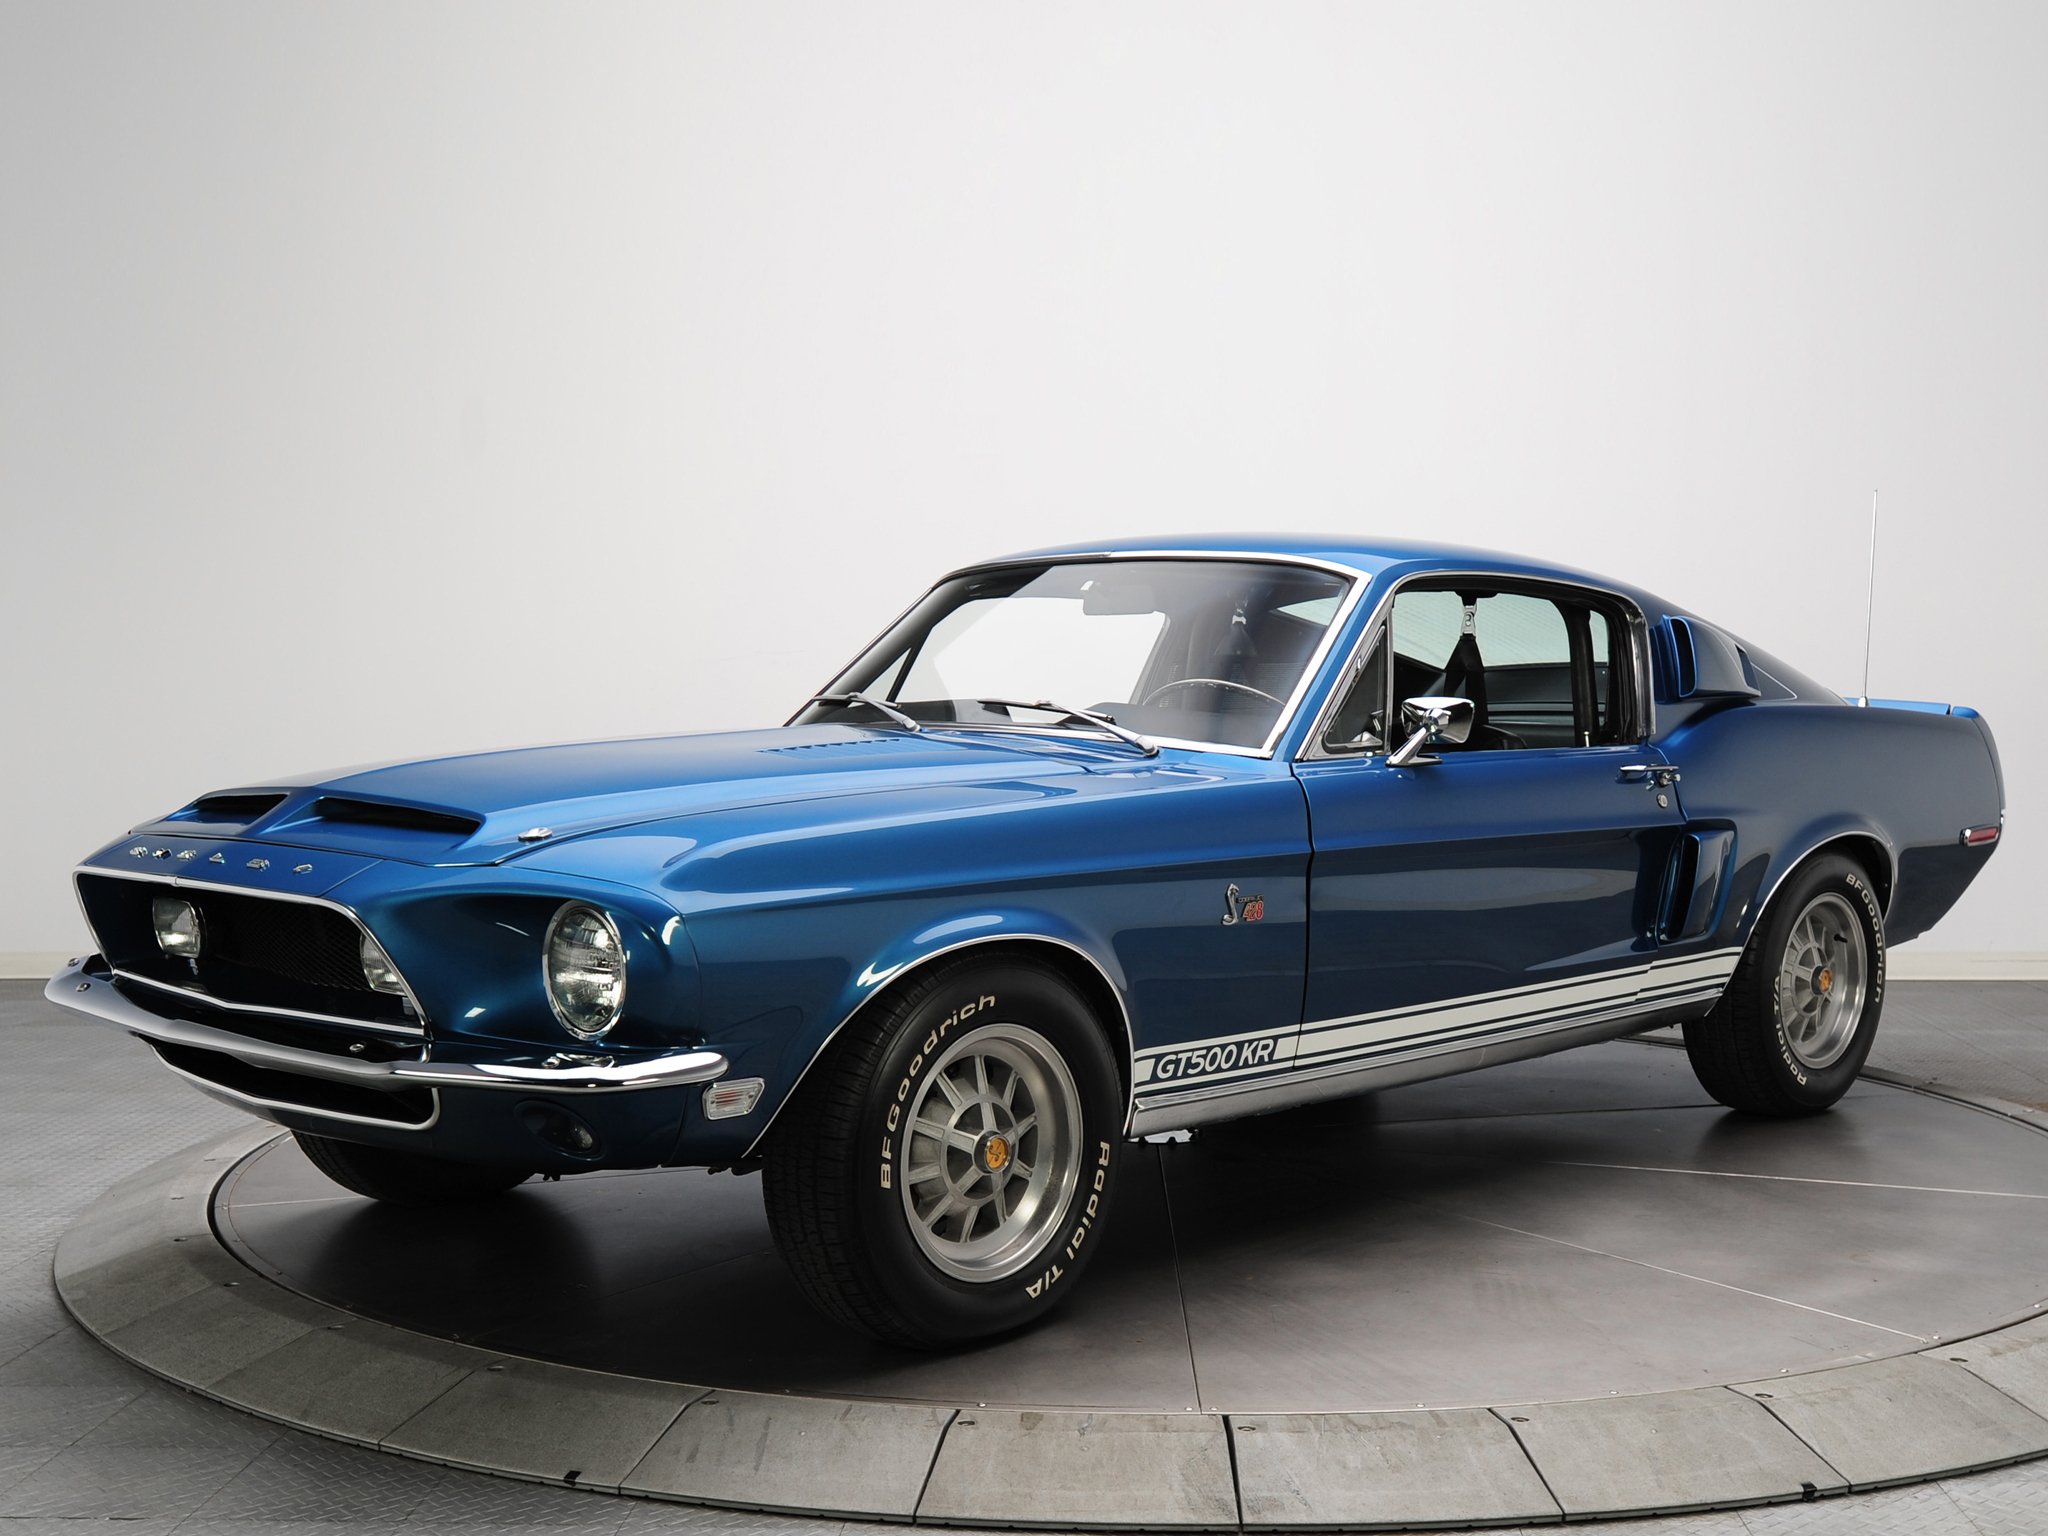 Old Ford Mustang Hd Wallpaper